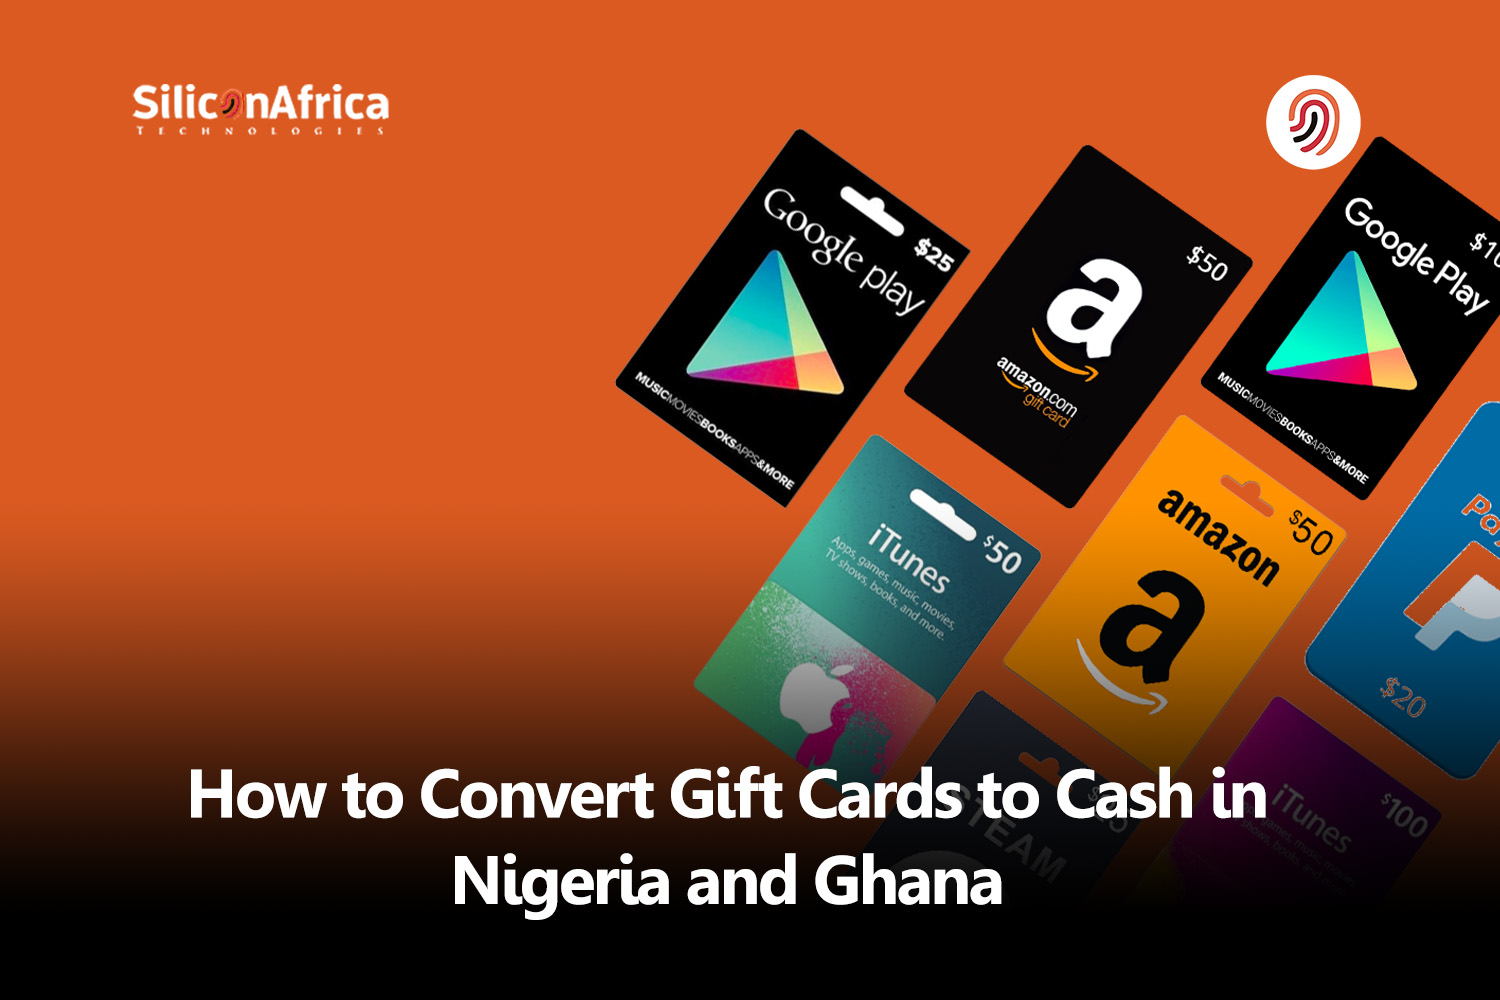 How to Convert Gift Cards to Cash in Nigeria and Ghana